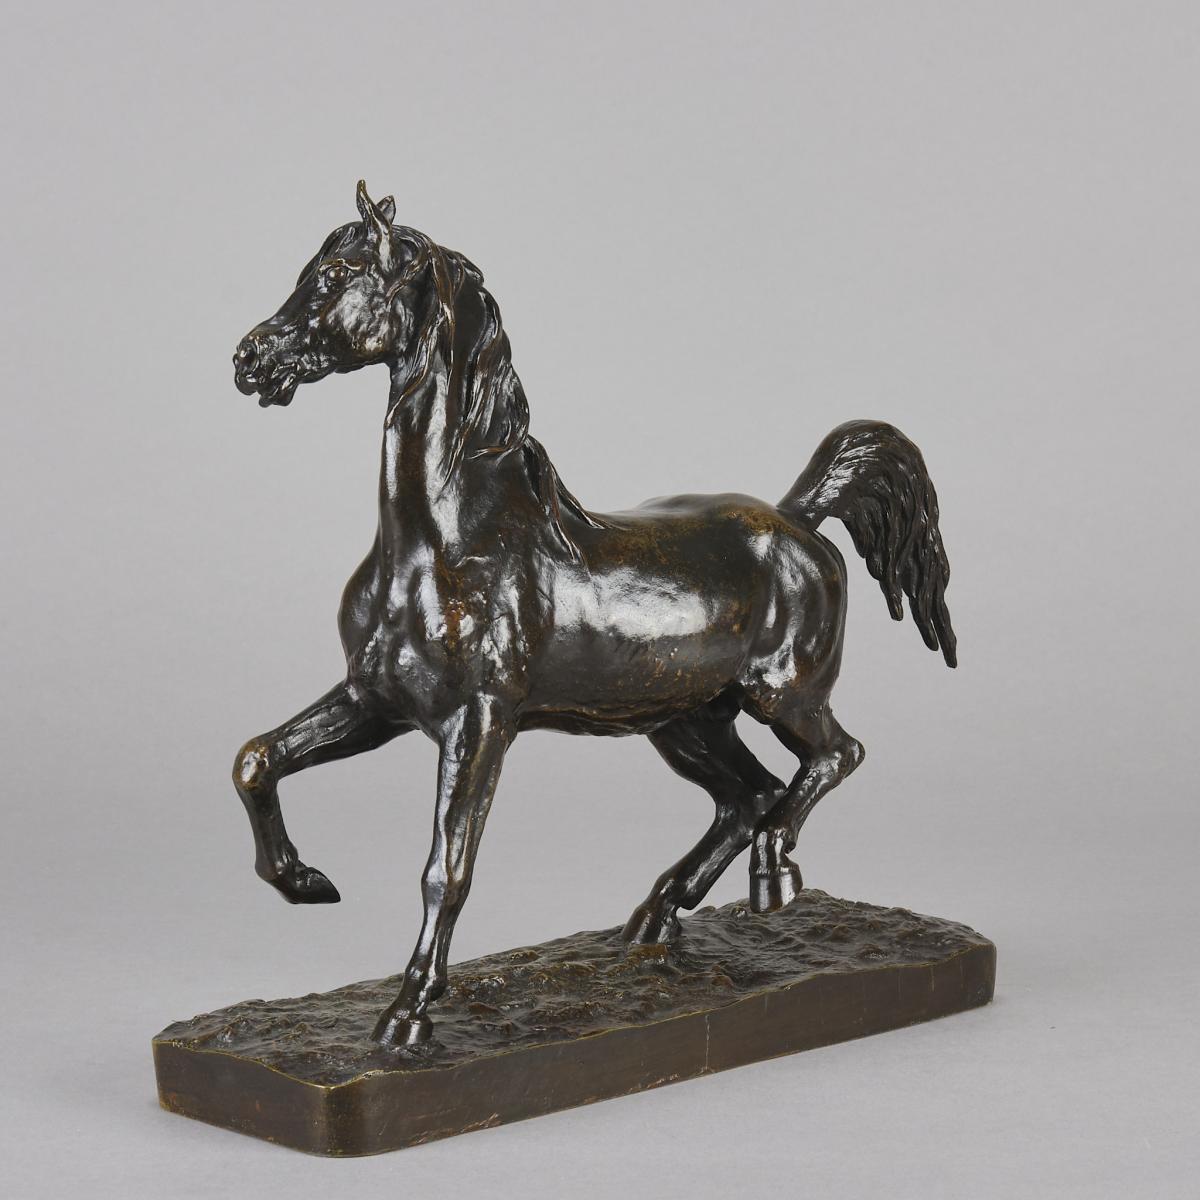 Mid 19th Century Animalier Bronze entitled "Cheval Arabe" by Christopher Fratin